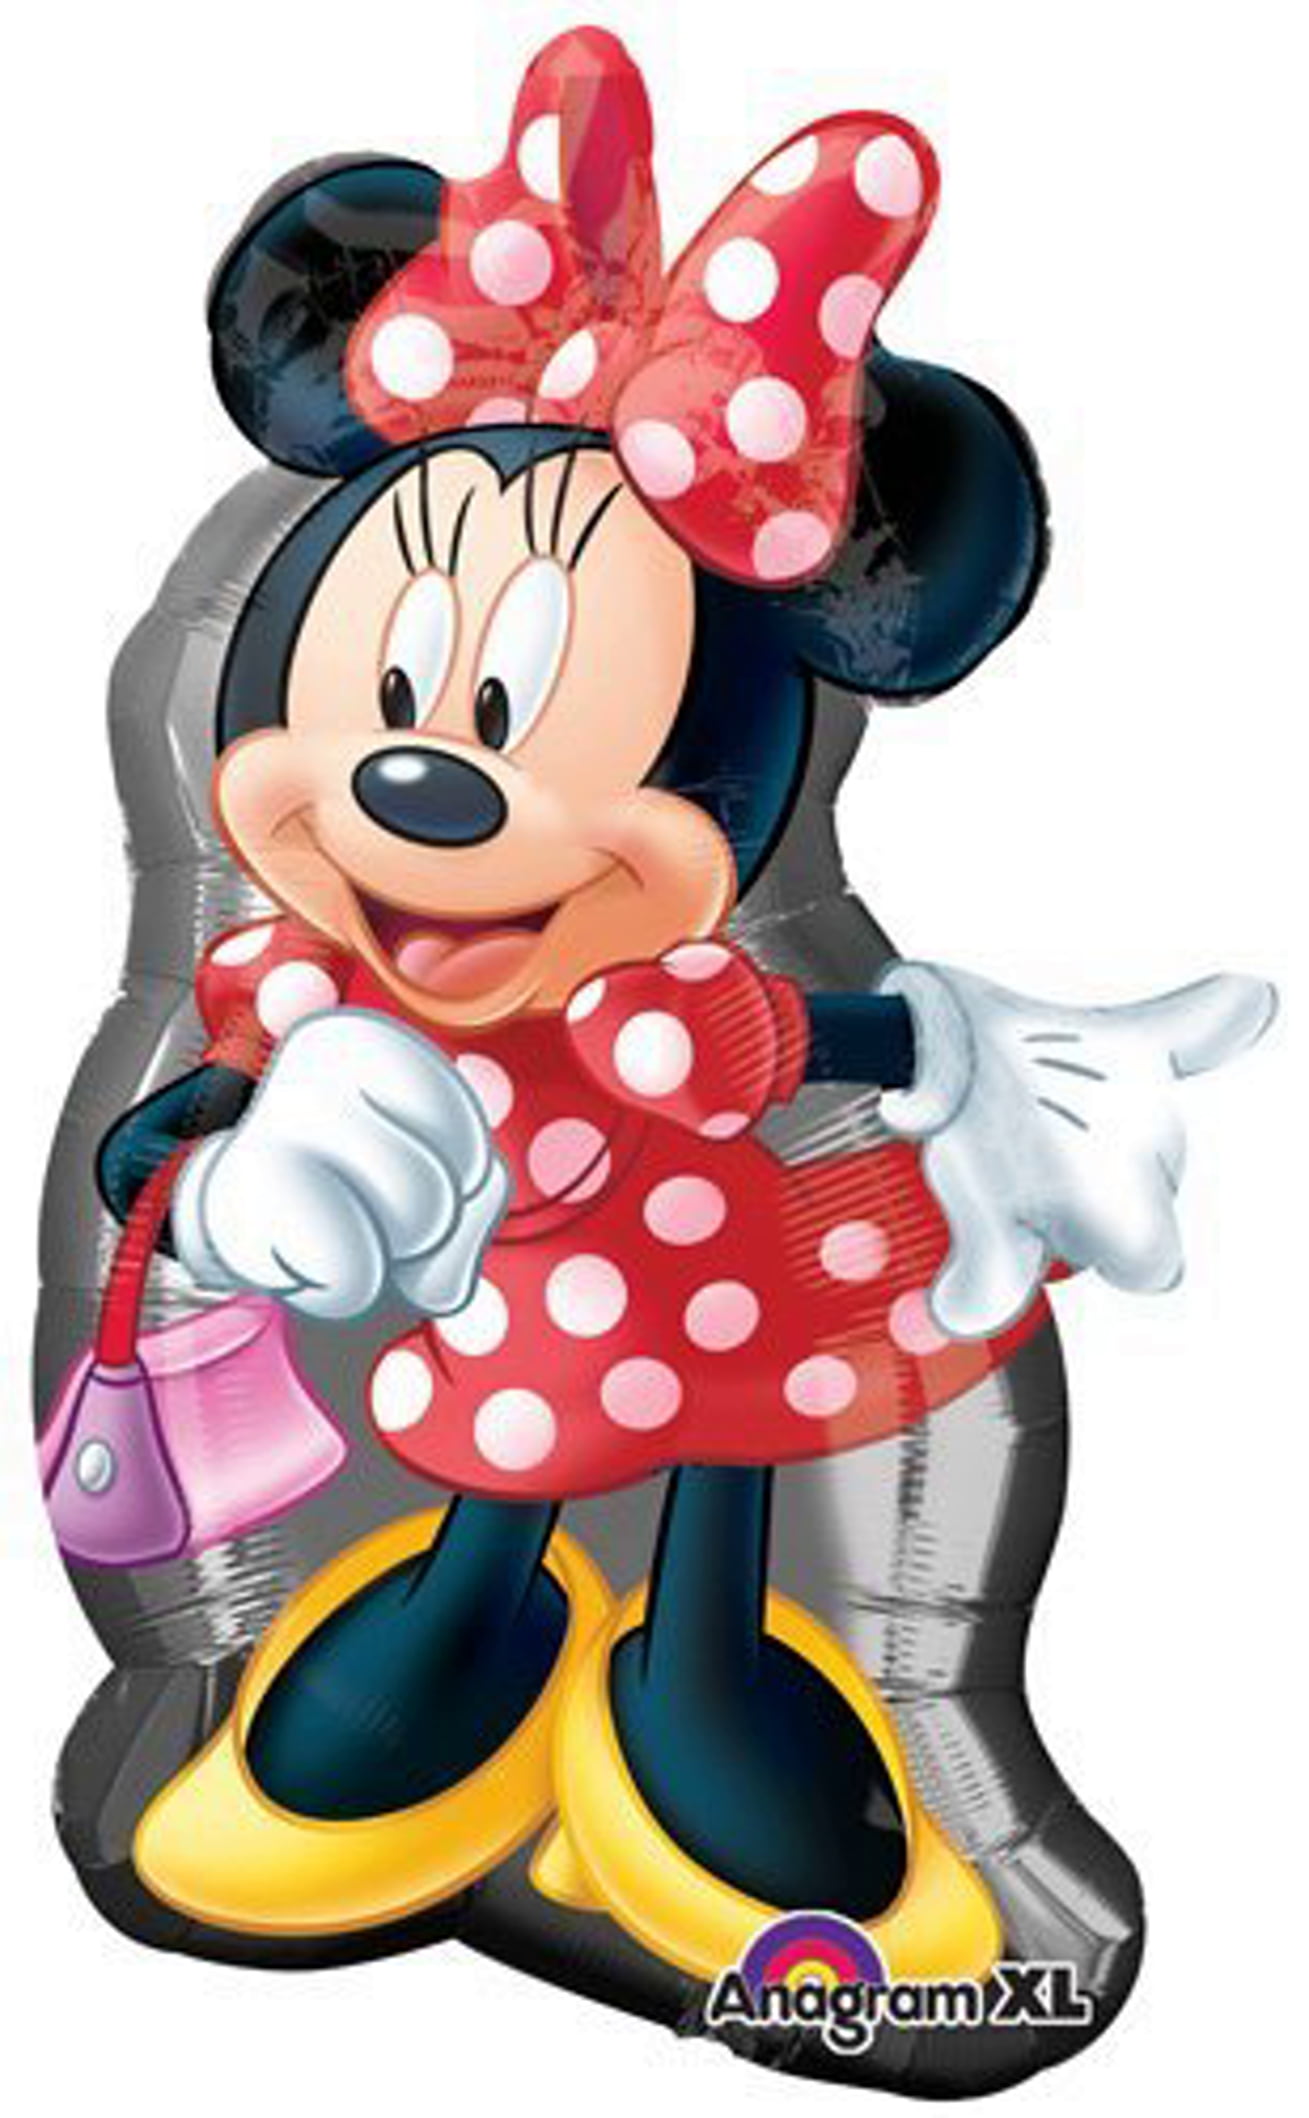 Globos Minnie Mouse 4 Sided Latex Balloons 11''/27.5cm. 6 ud pack